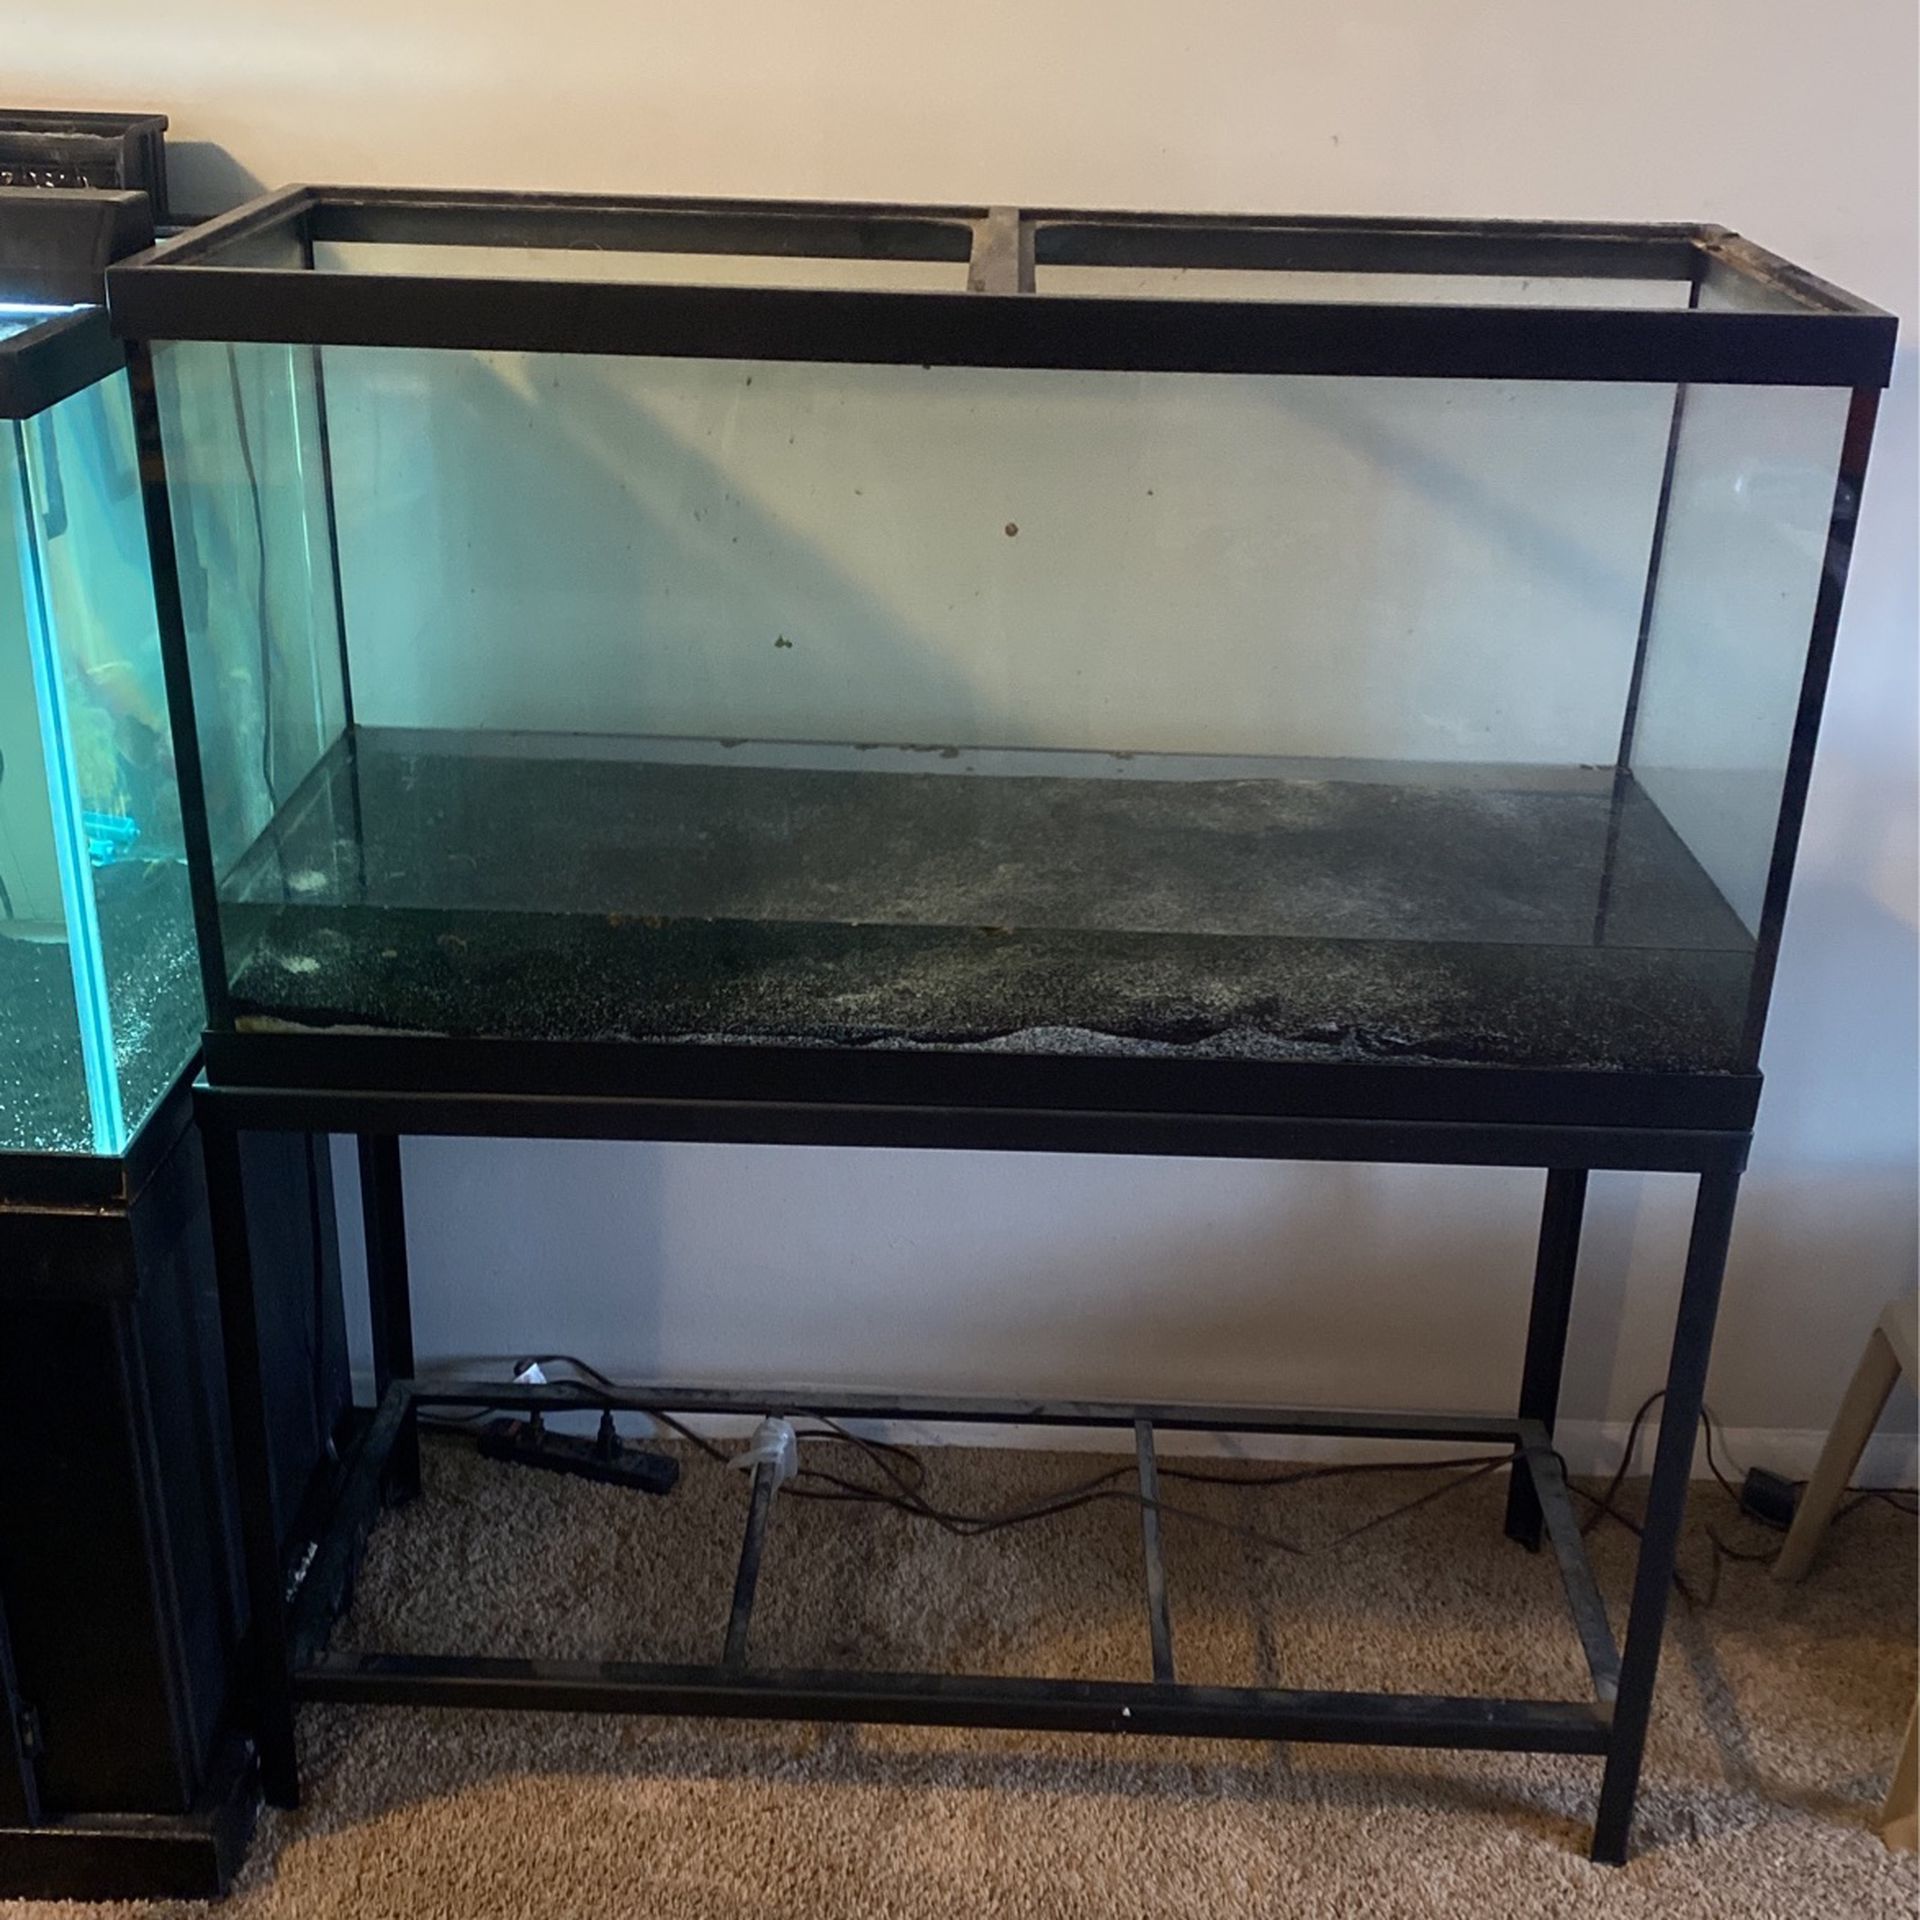 90 gallon fish tank with stand